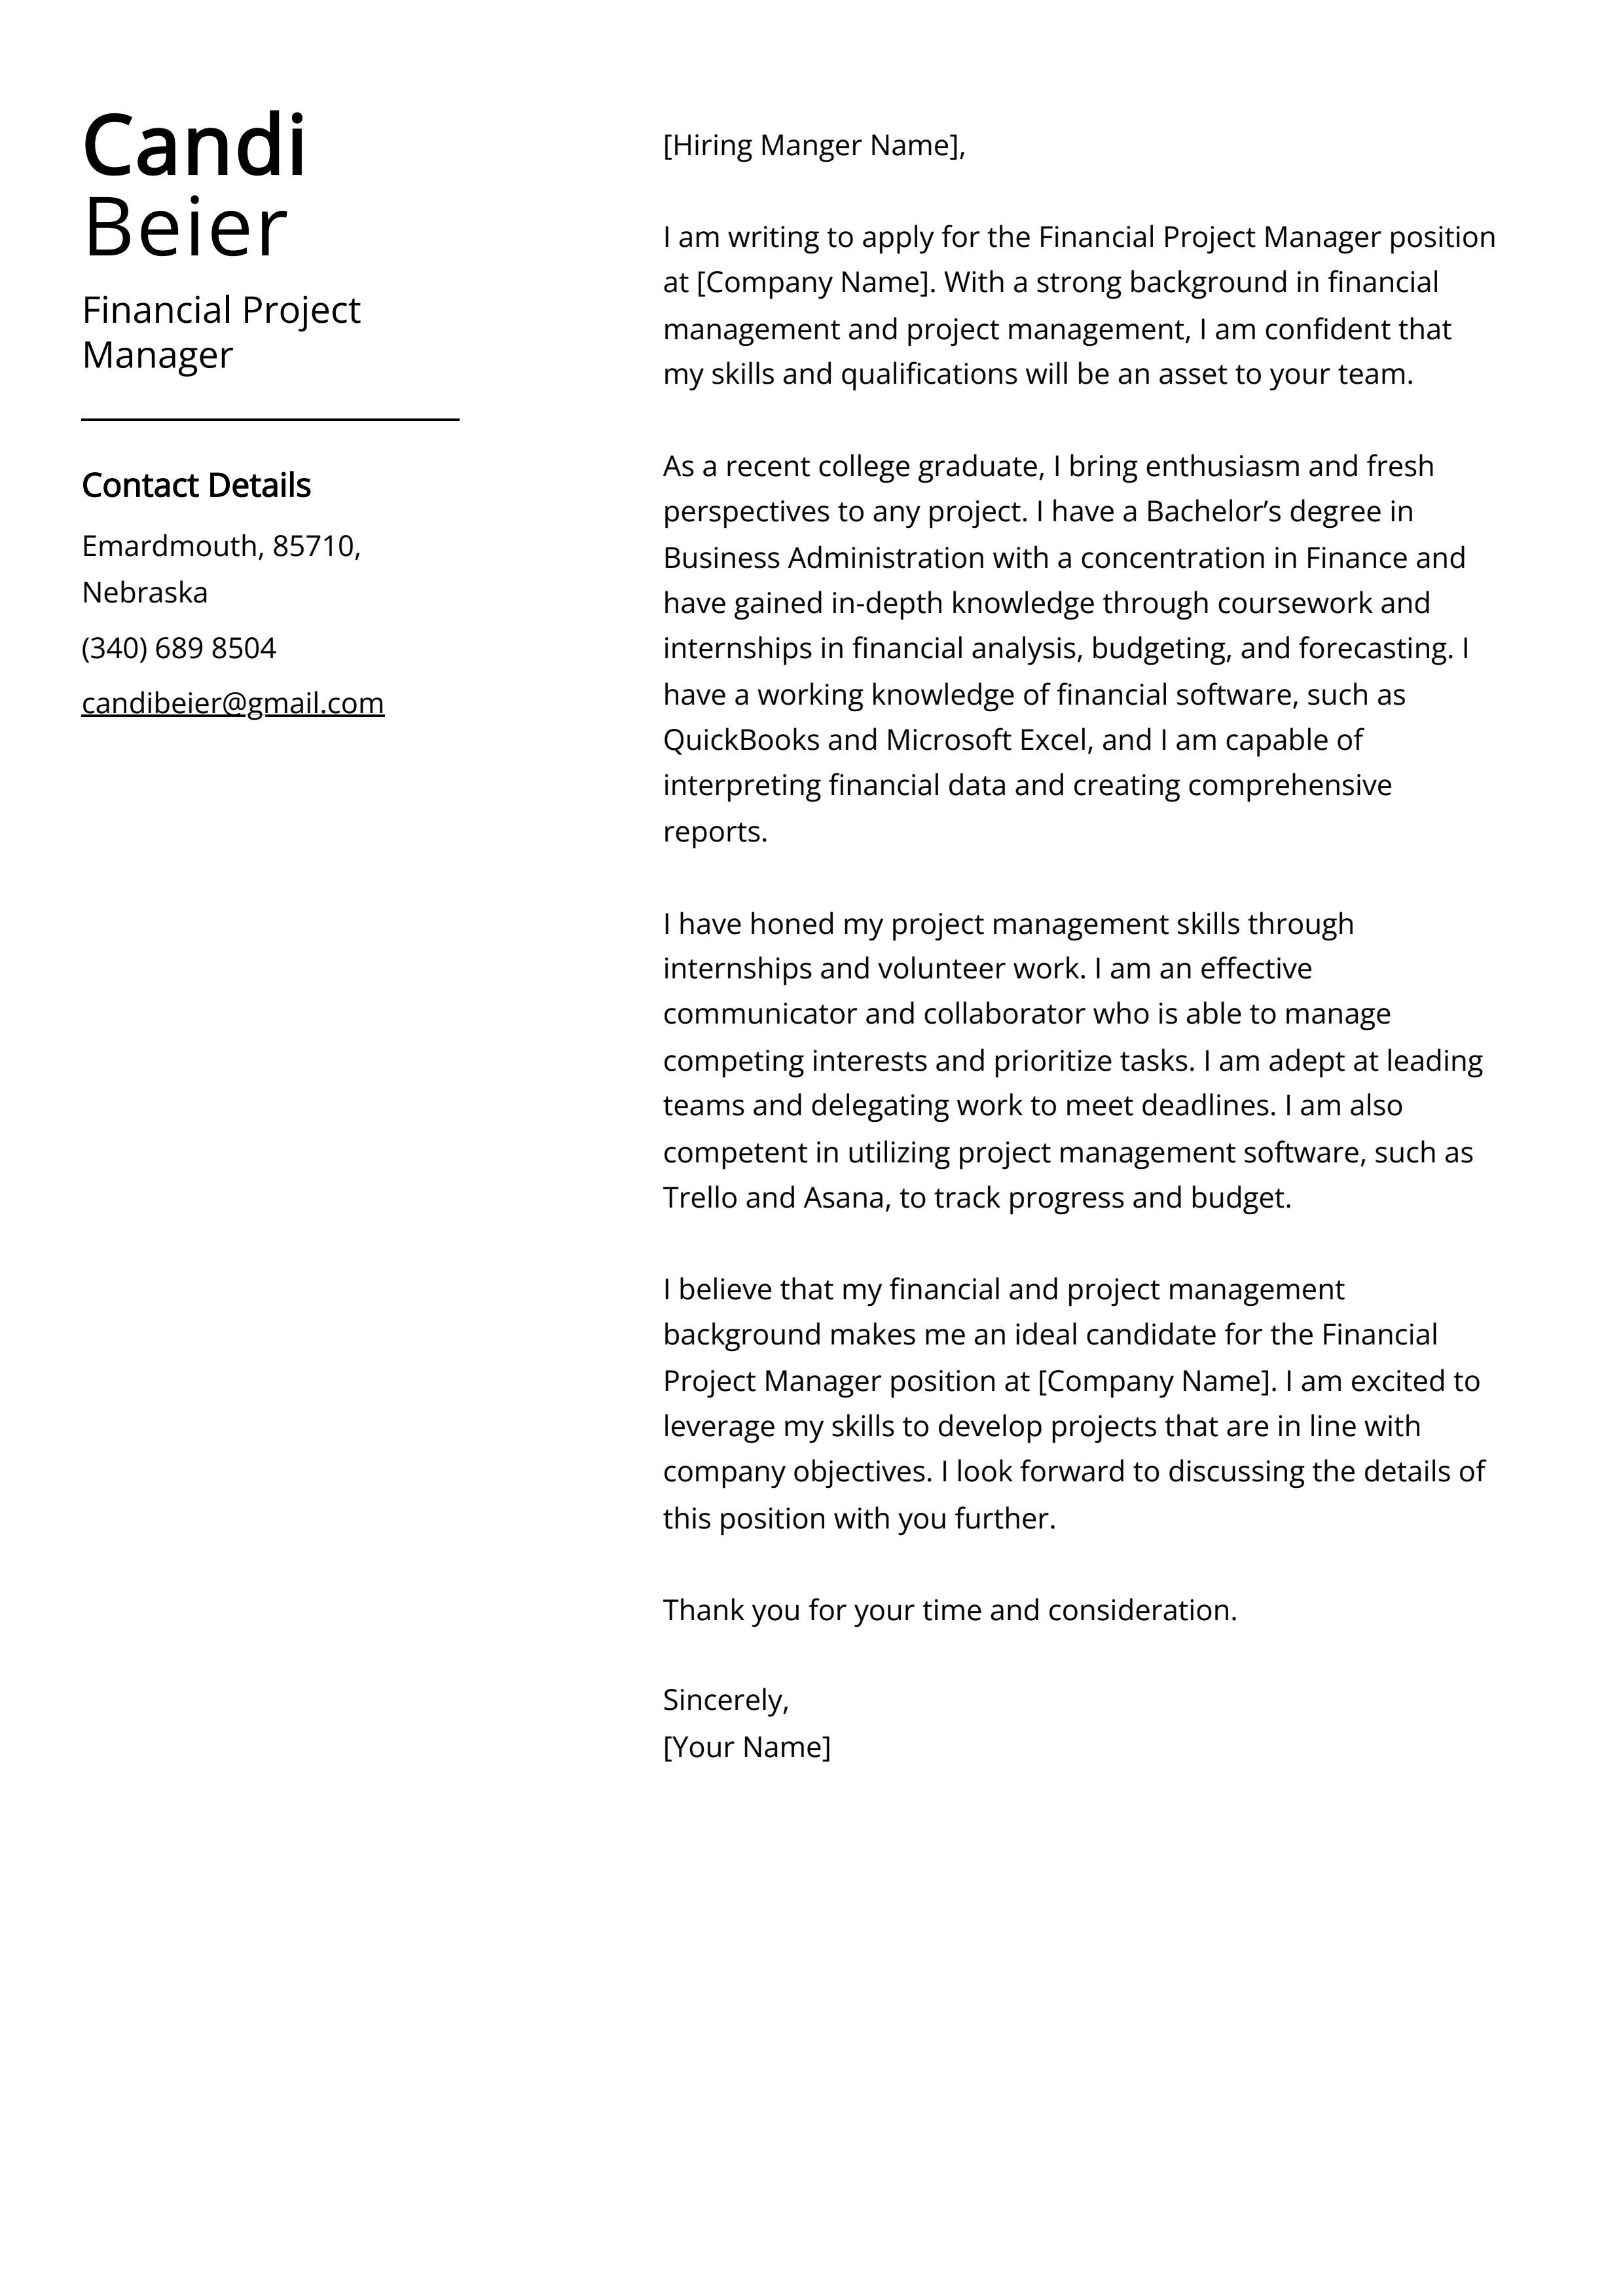 Financial Project Manager Cover Letter Example